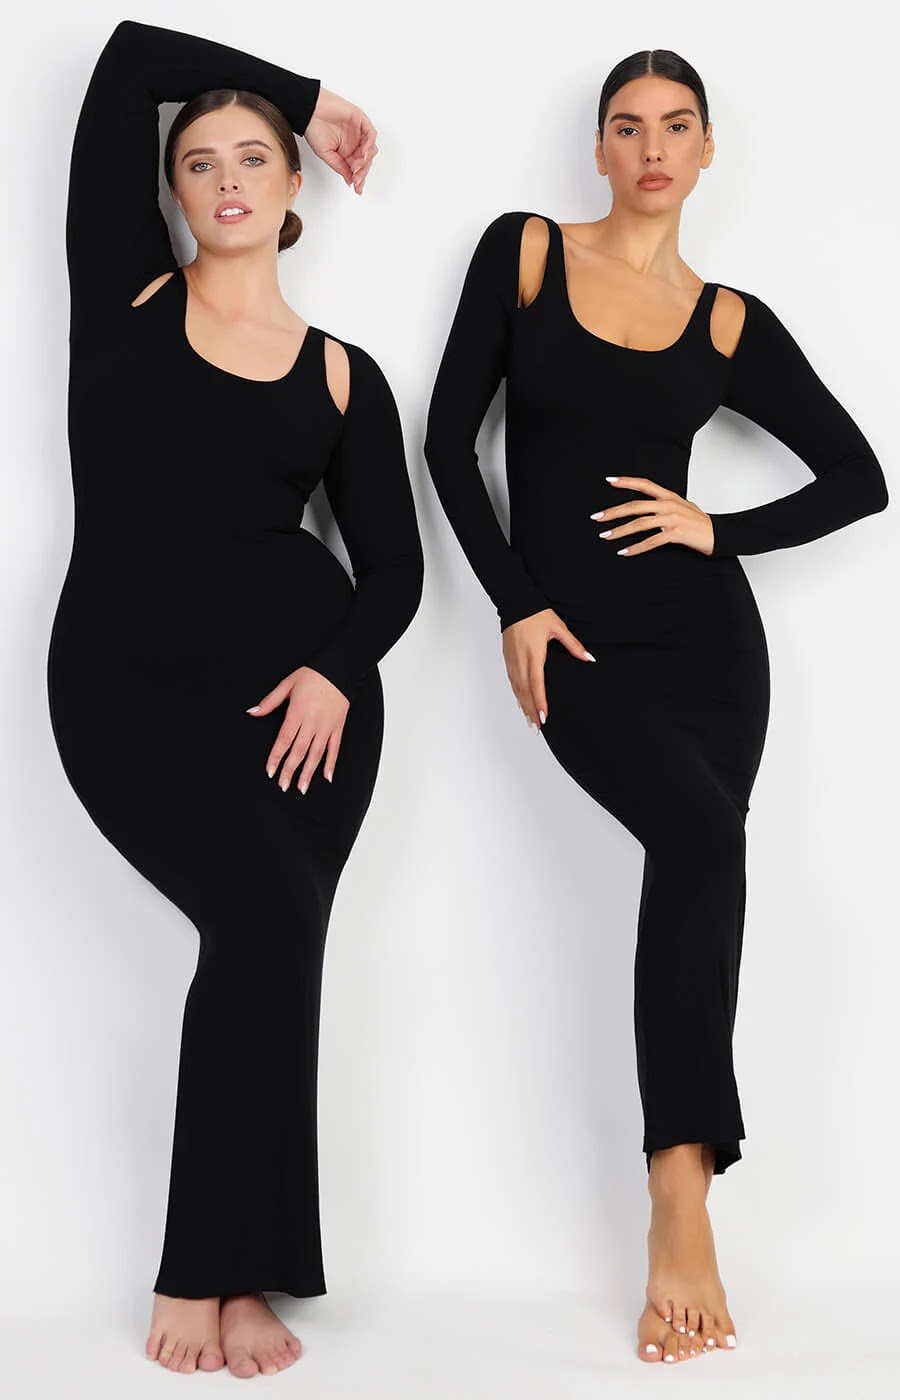 Shapewear Dress: The Secret to Appearing More Beautiful and Confident